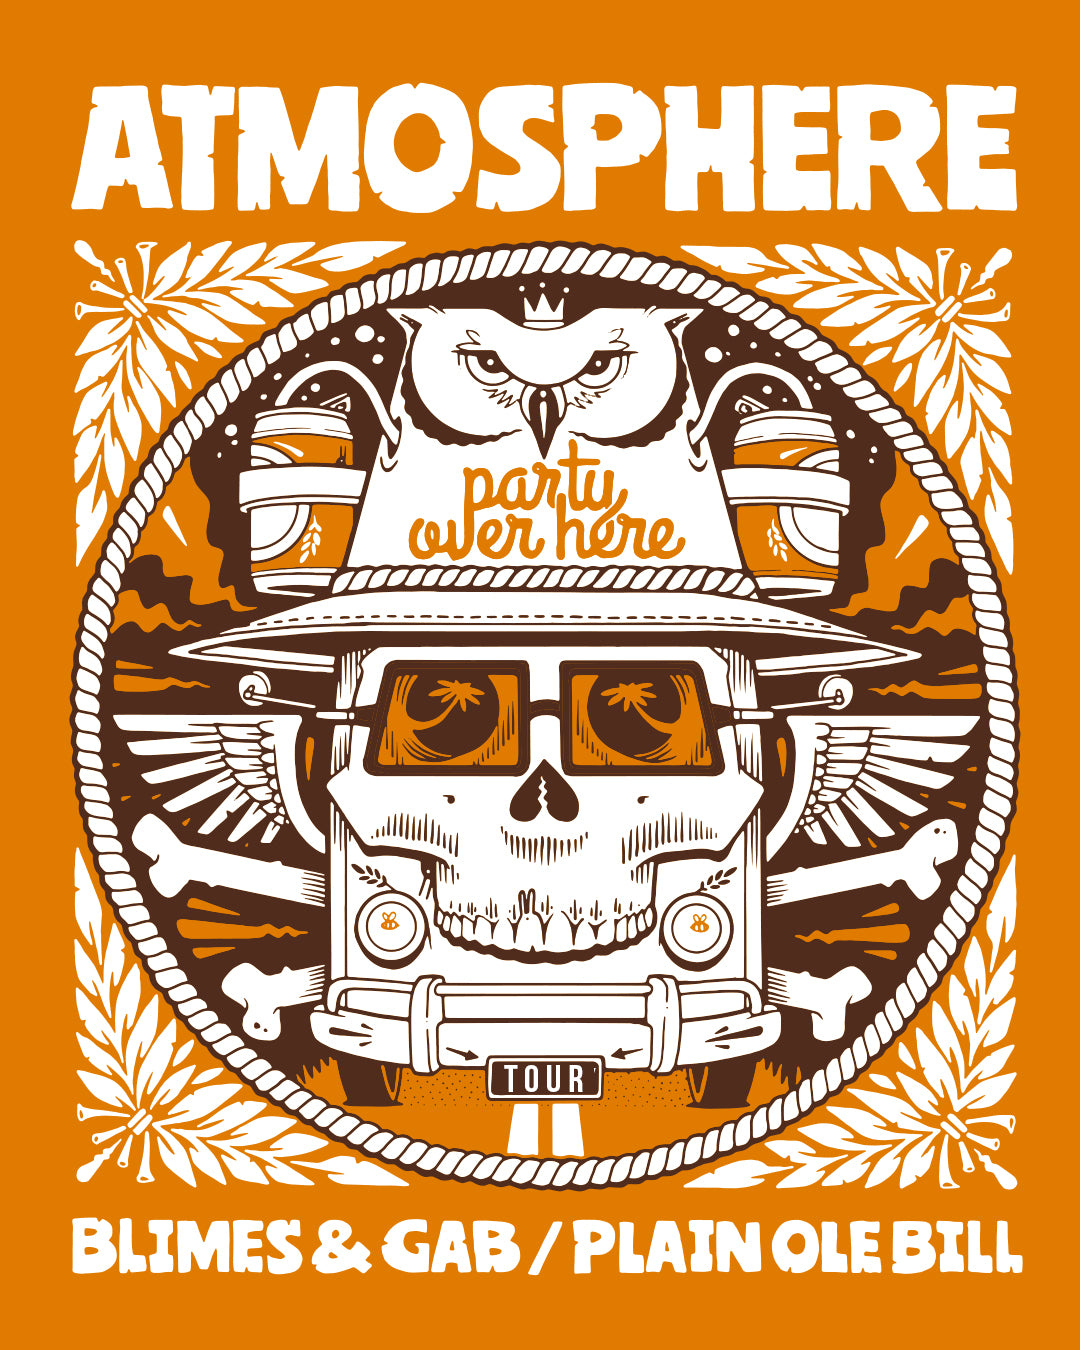 Atmosphere announces the Party Over Here Tour!